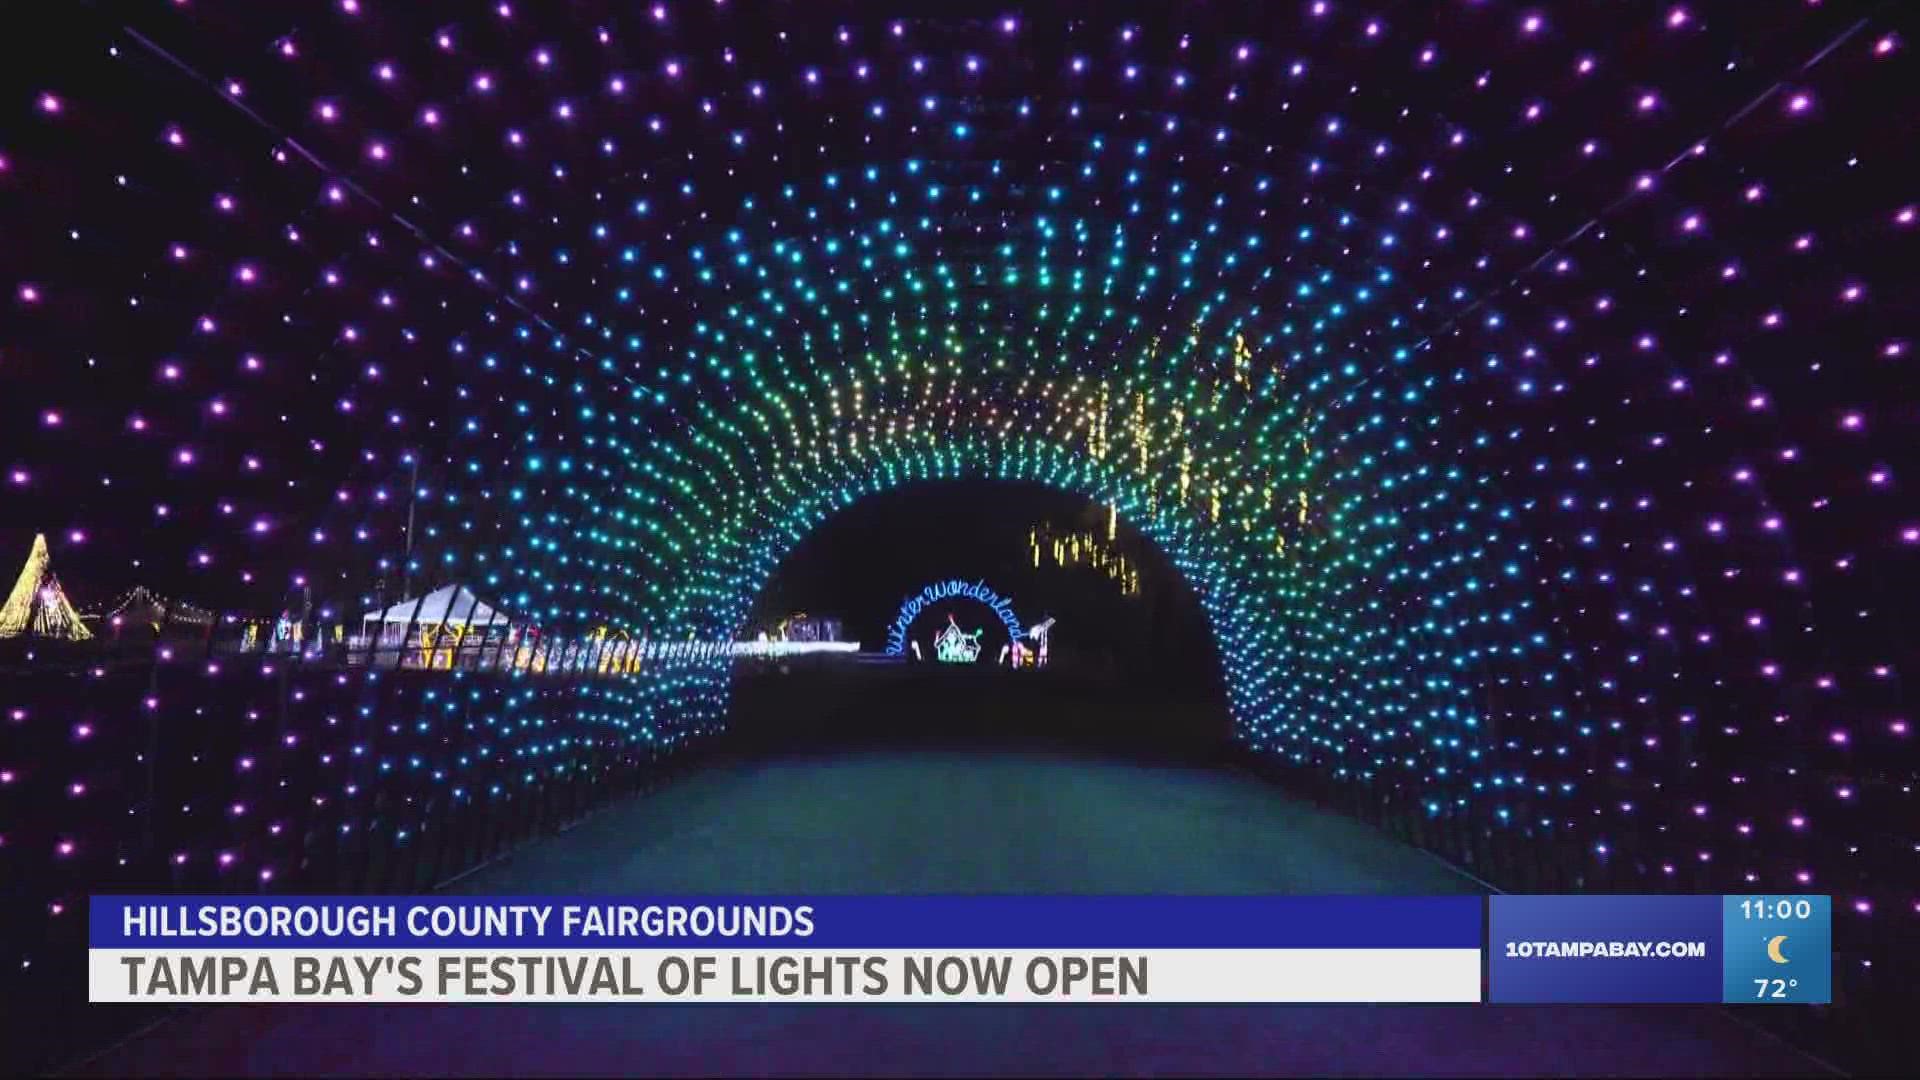 Holiday season is in full swing, and that means light displays are up and shining bright across Tampa Bay.